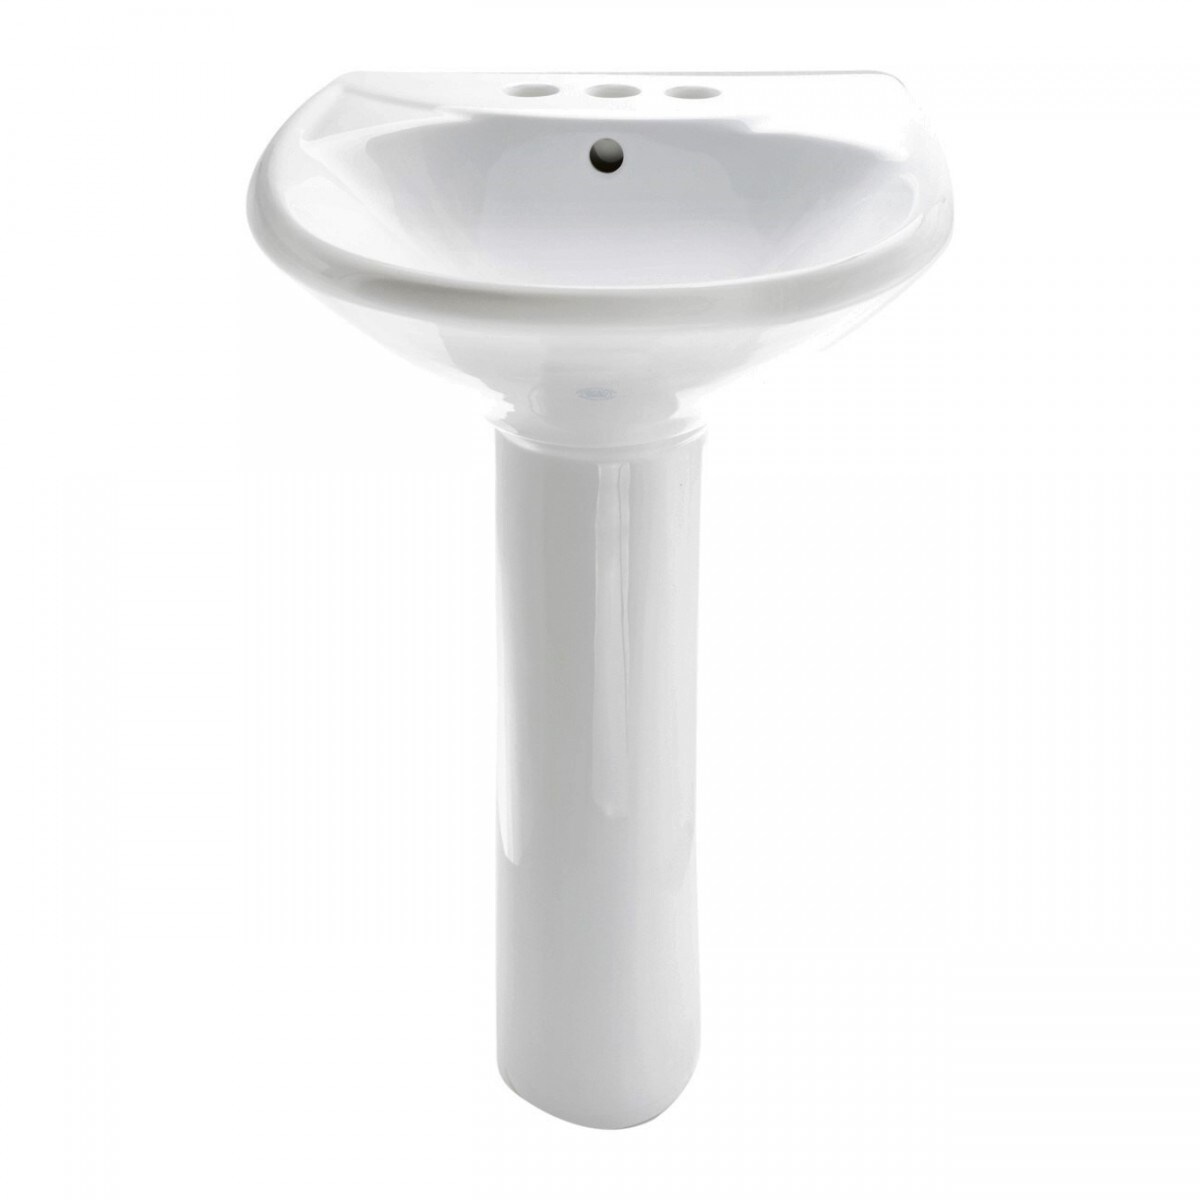 White China Bathroom Pedestal Sink Centerset Faucet Holes With Overflow